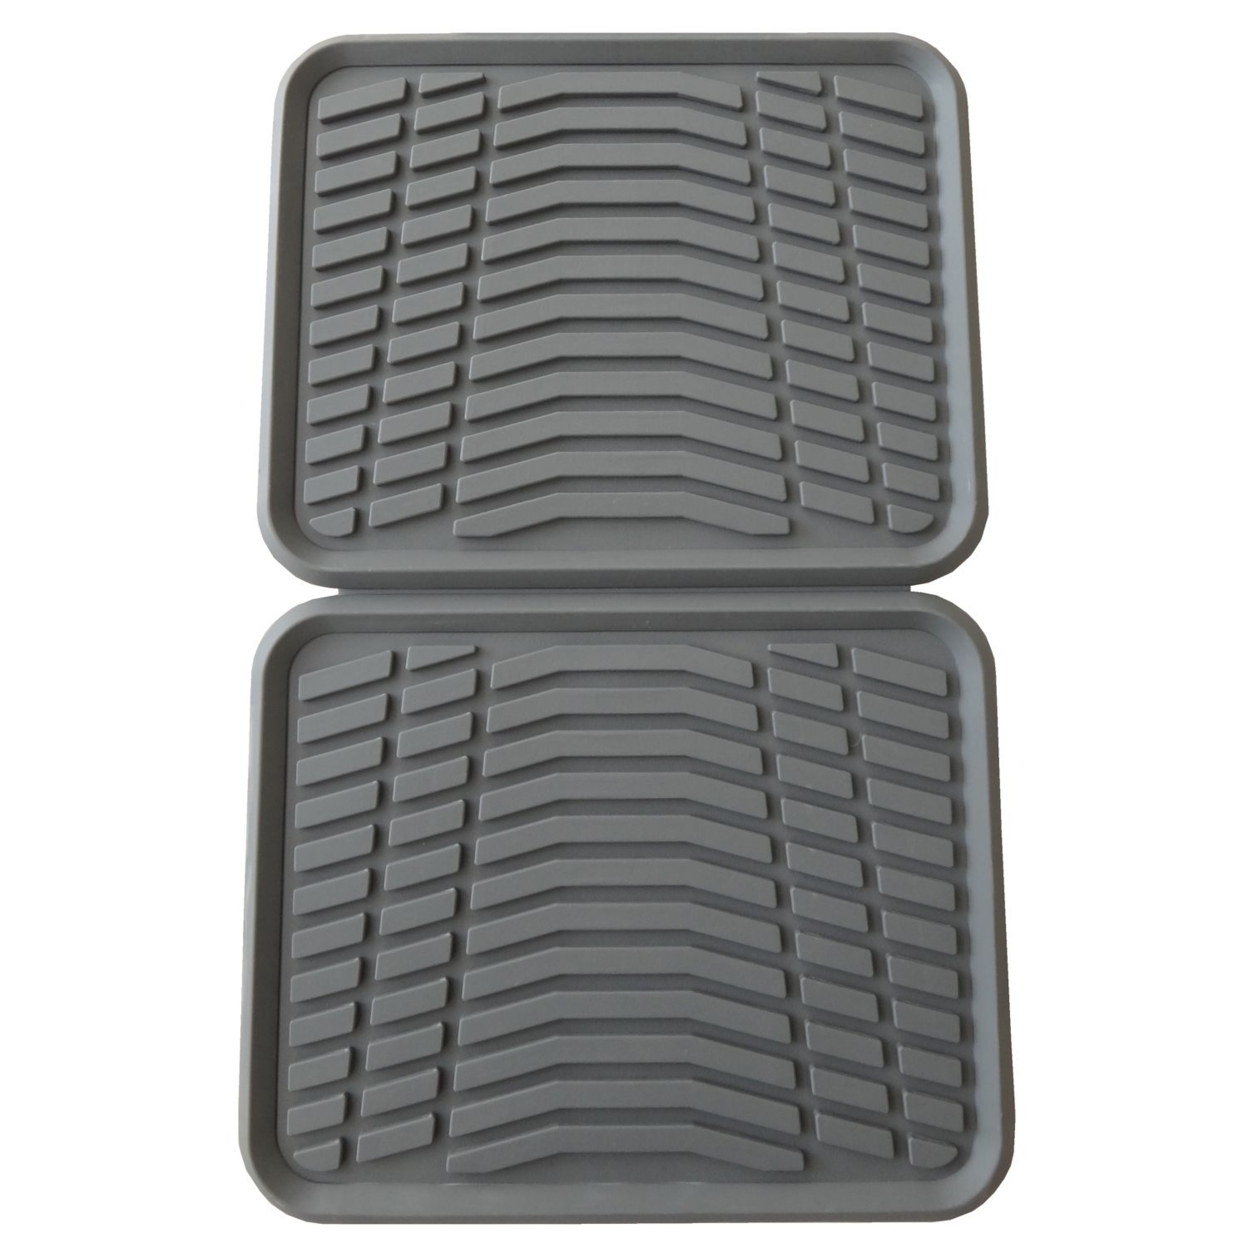 Member's Mark All-Weather Automotive Floor Mats (4 Pack, Gray)